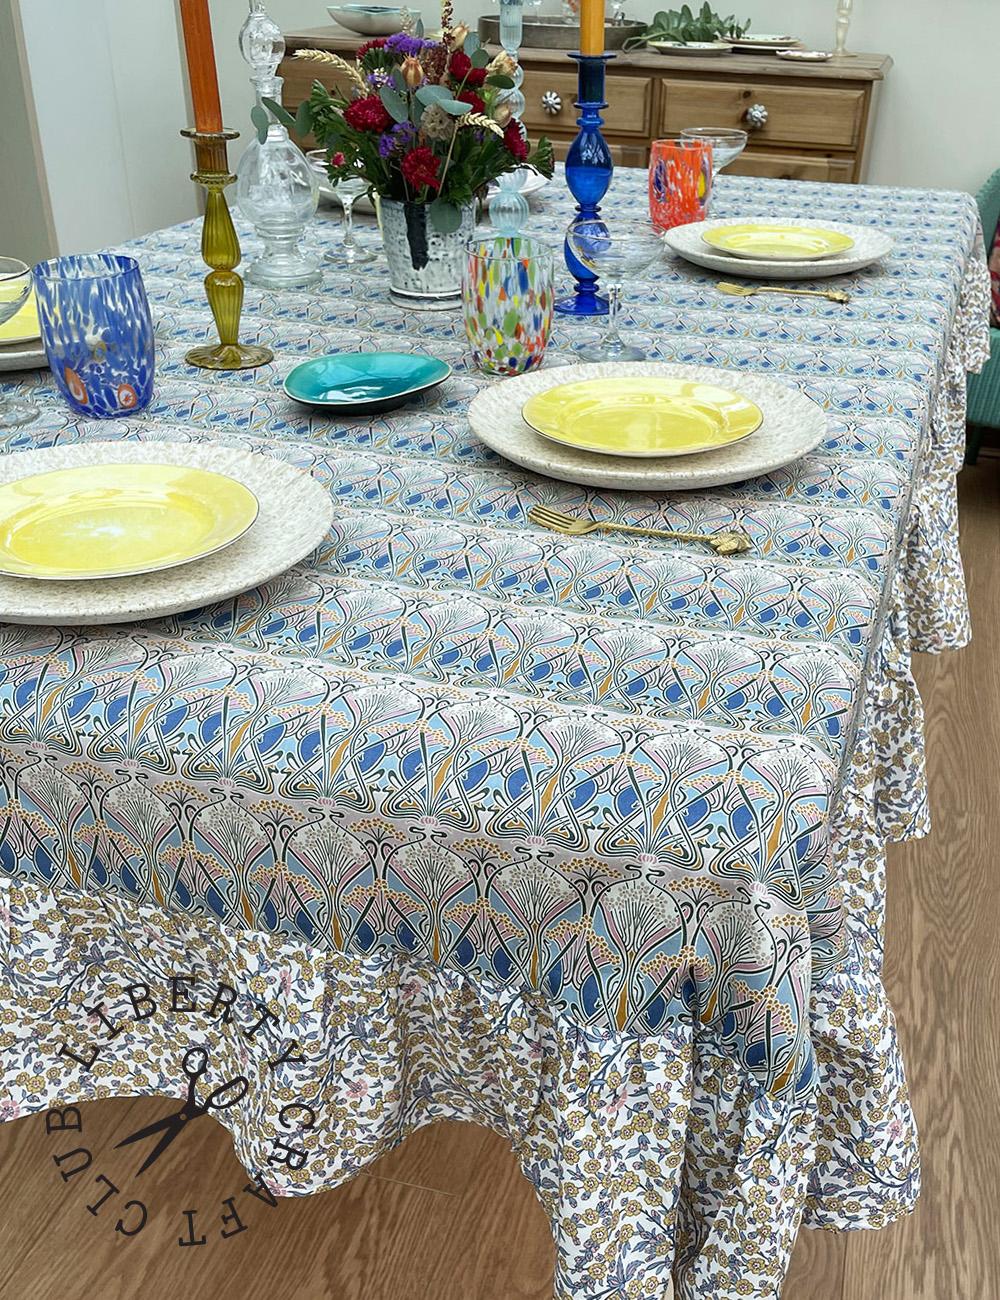 How To Make A Tablecloth With A Ruffle Trim, Liberty Craft Club